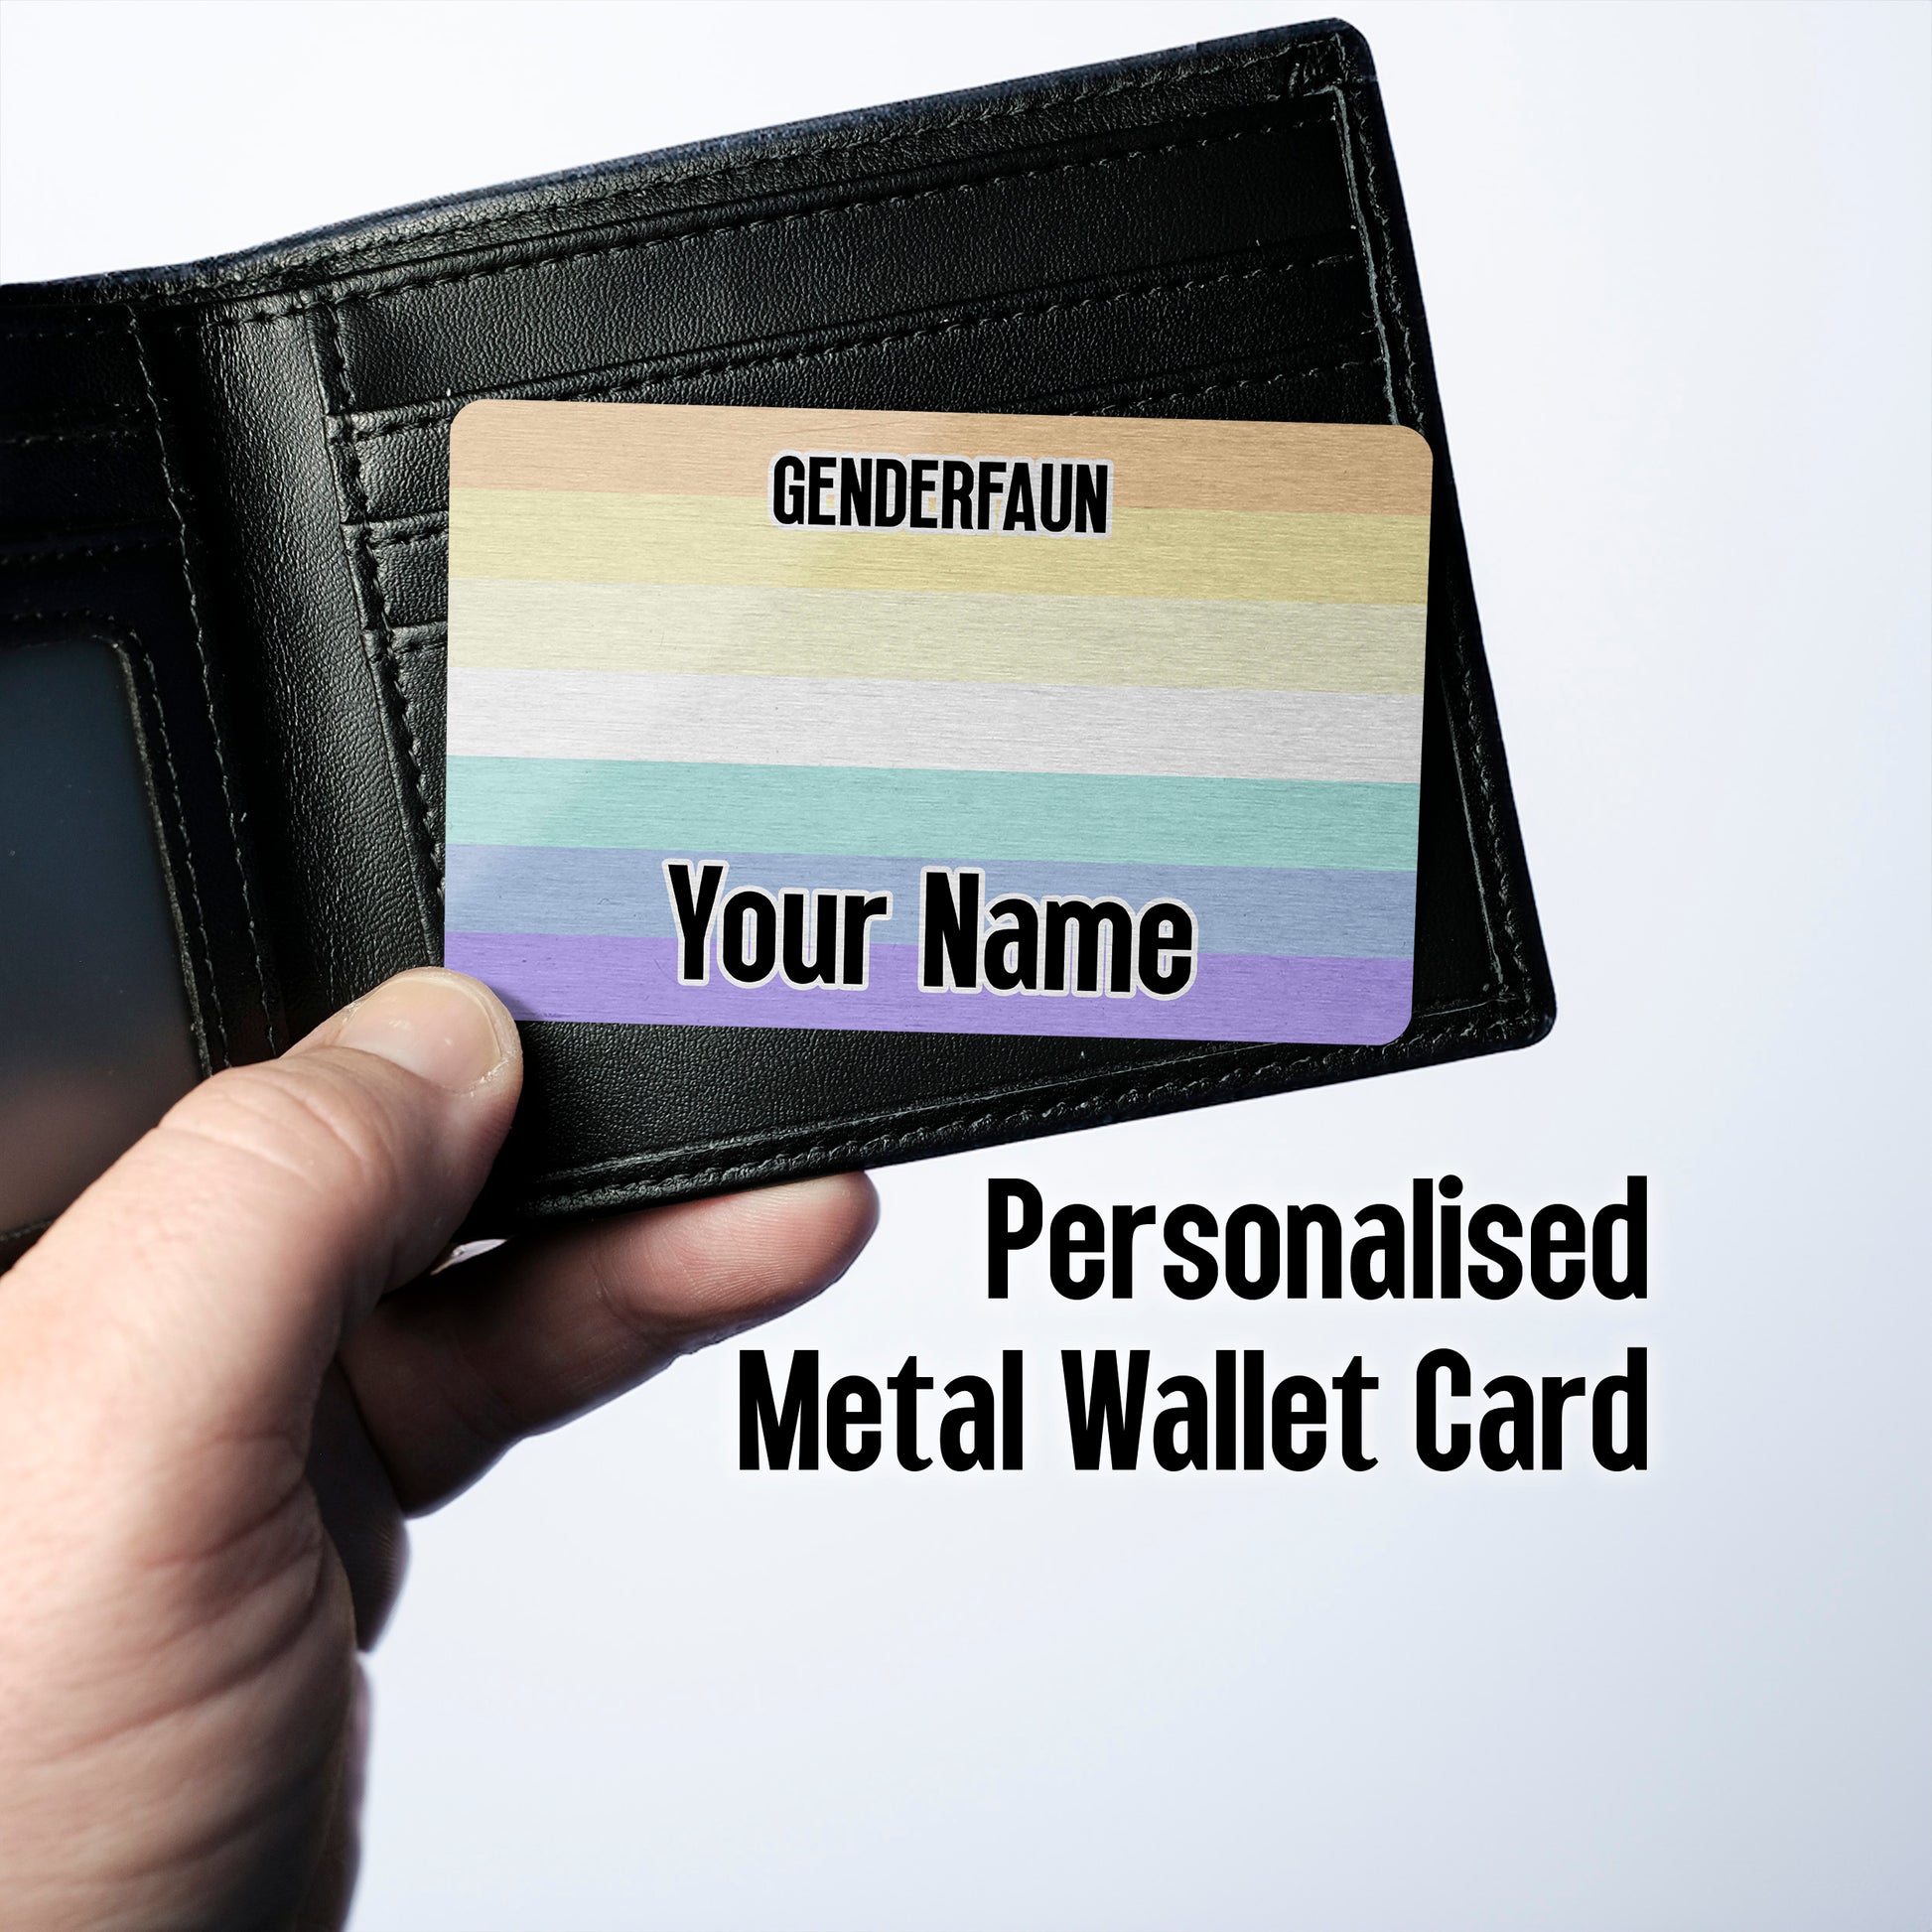 Aluminium wallet card personalised with your name and the genderfaun pride flag